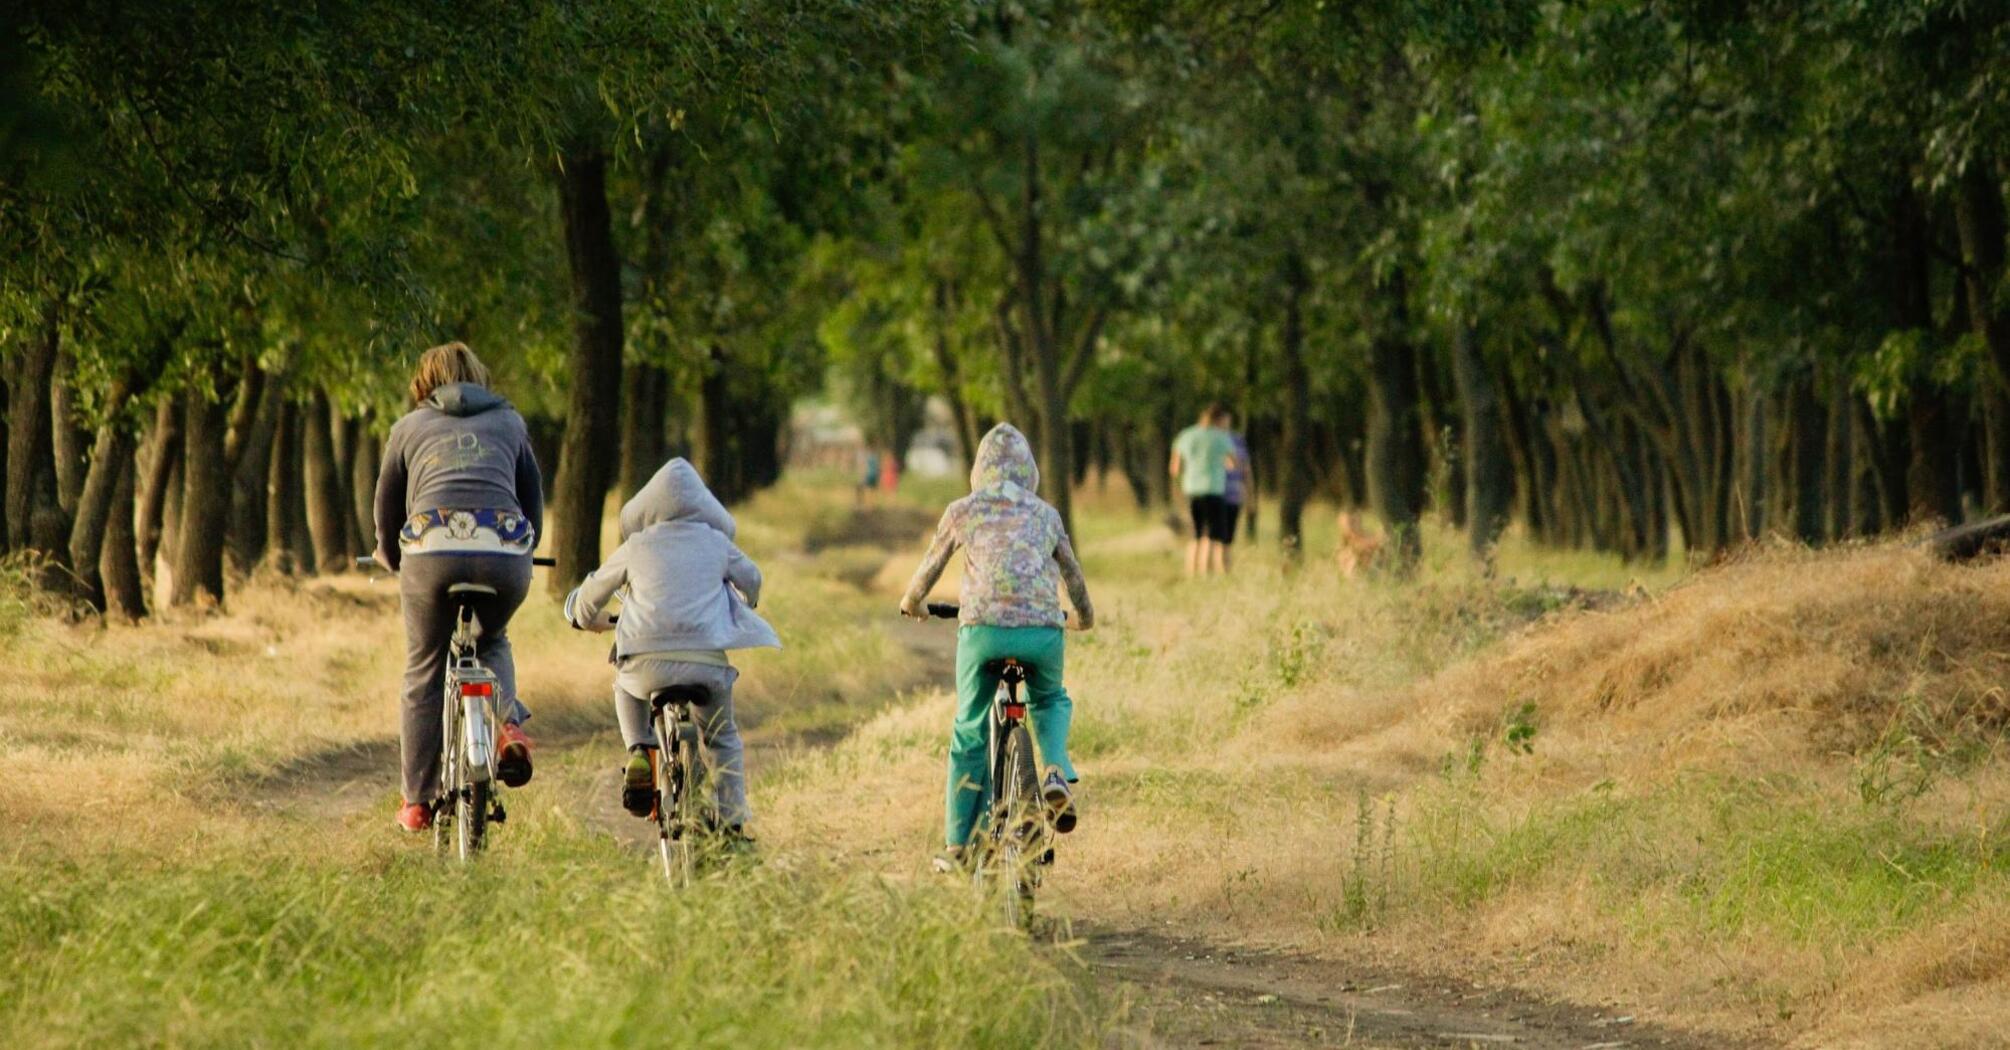 Family rides a bicycle in a field